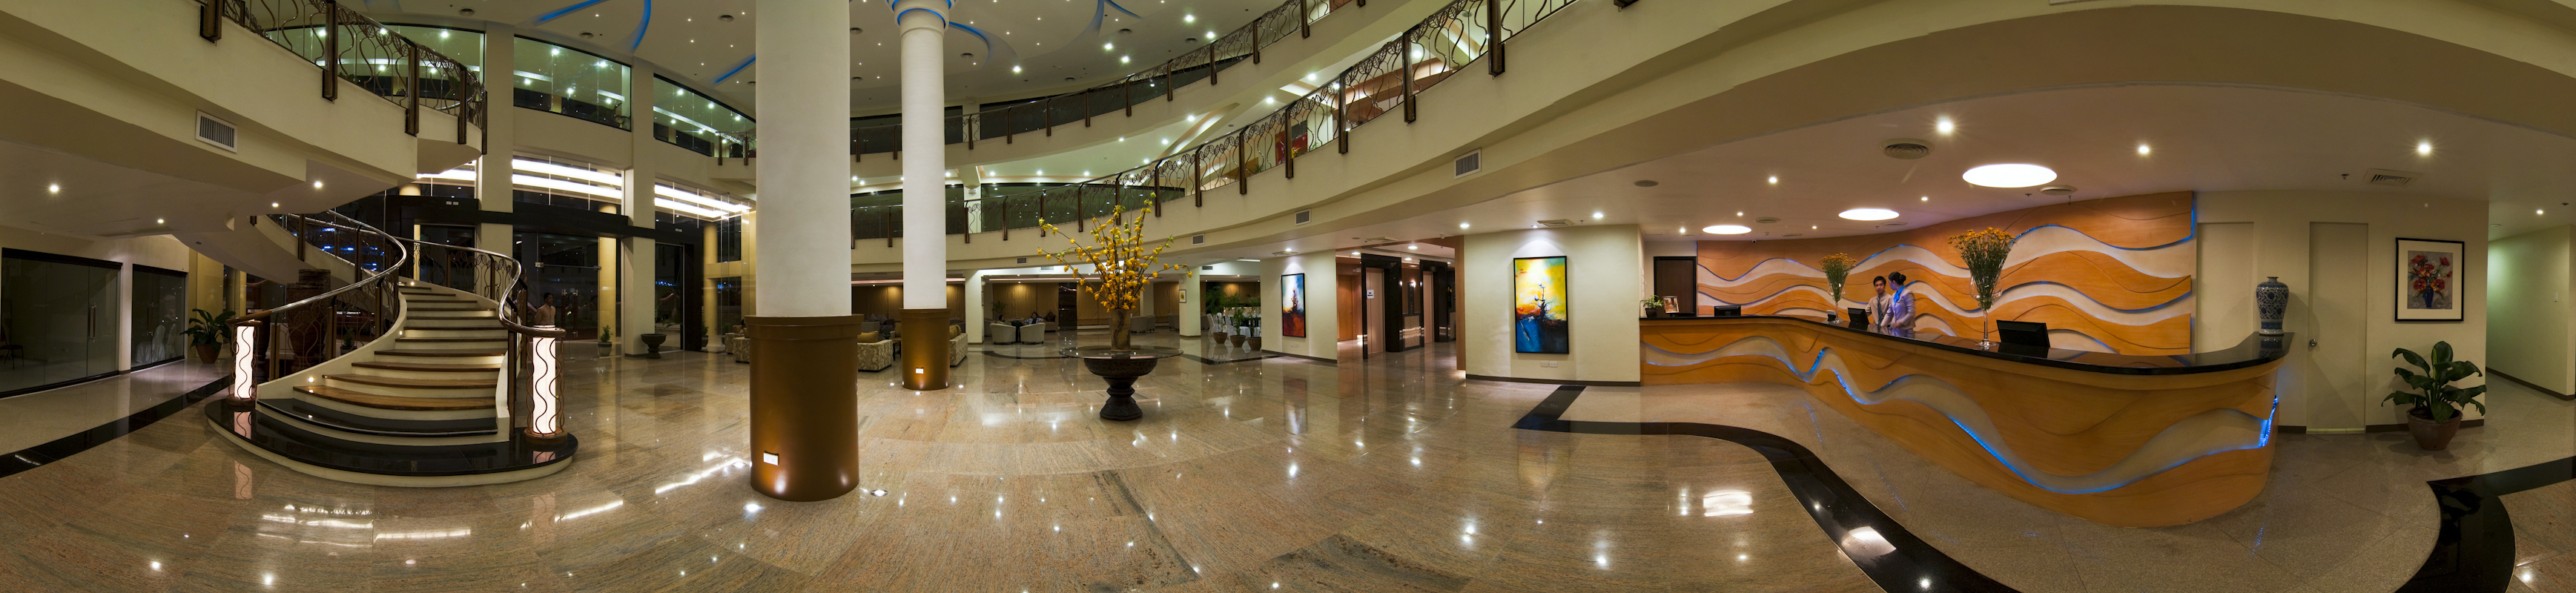 The Pinnacle Hotel and Suites - Lobby 13